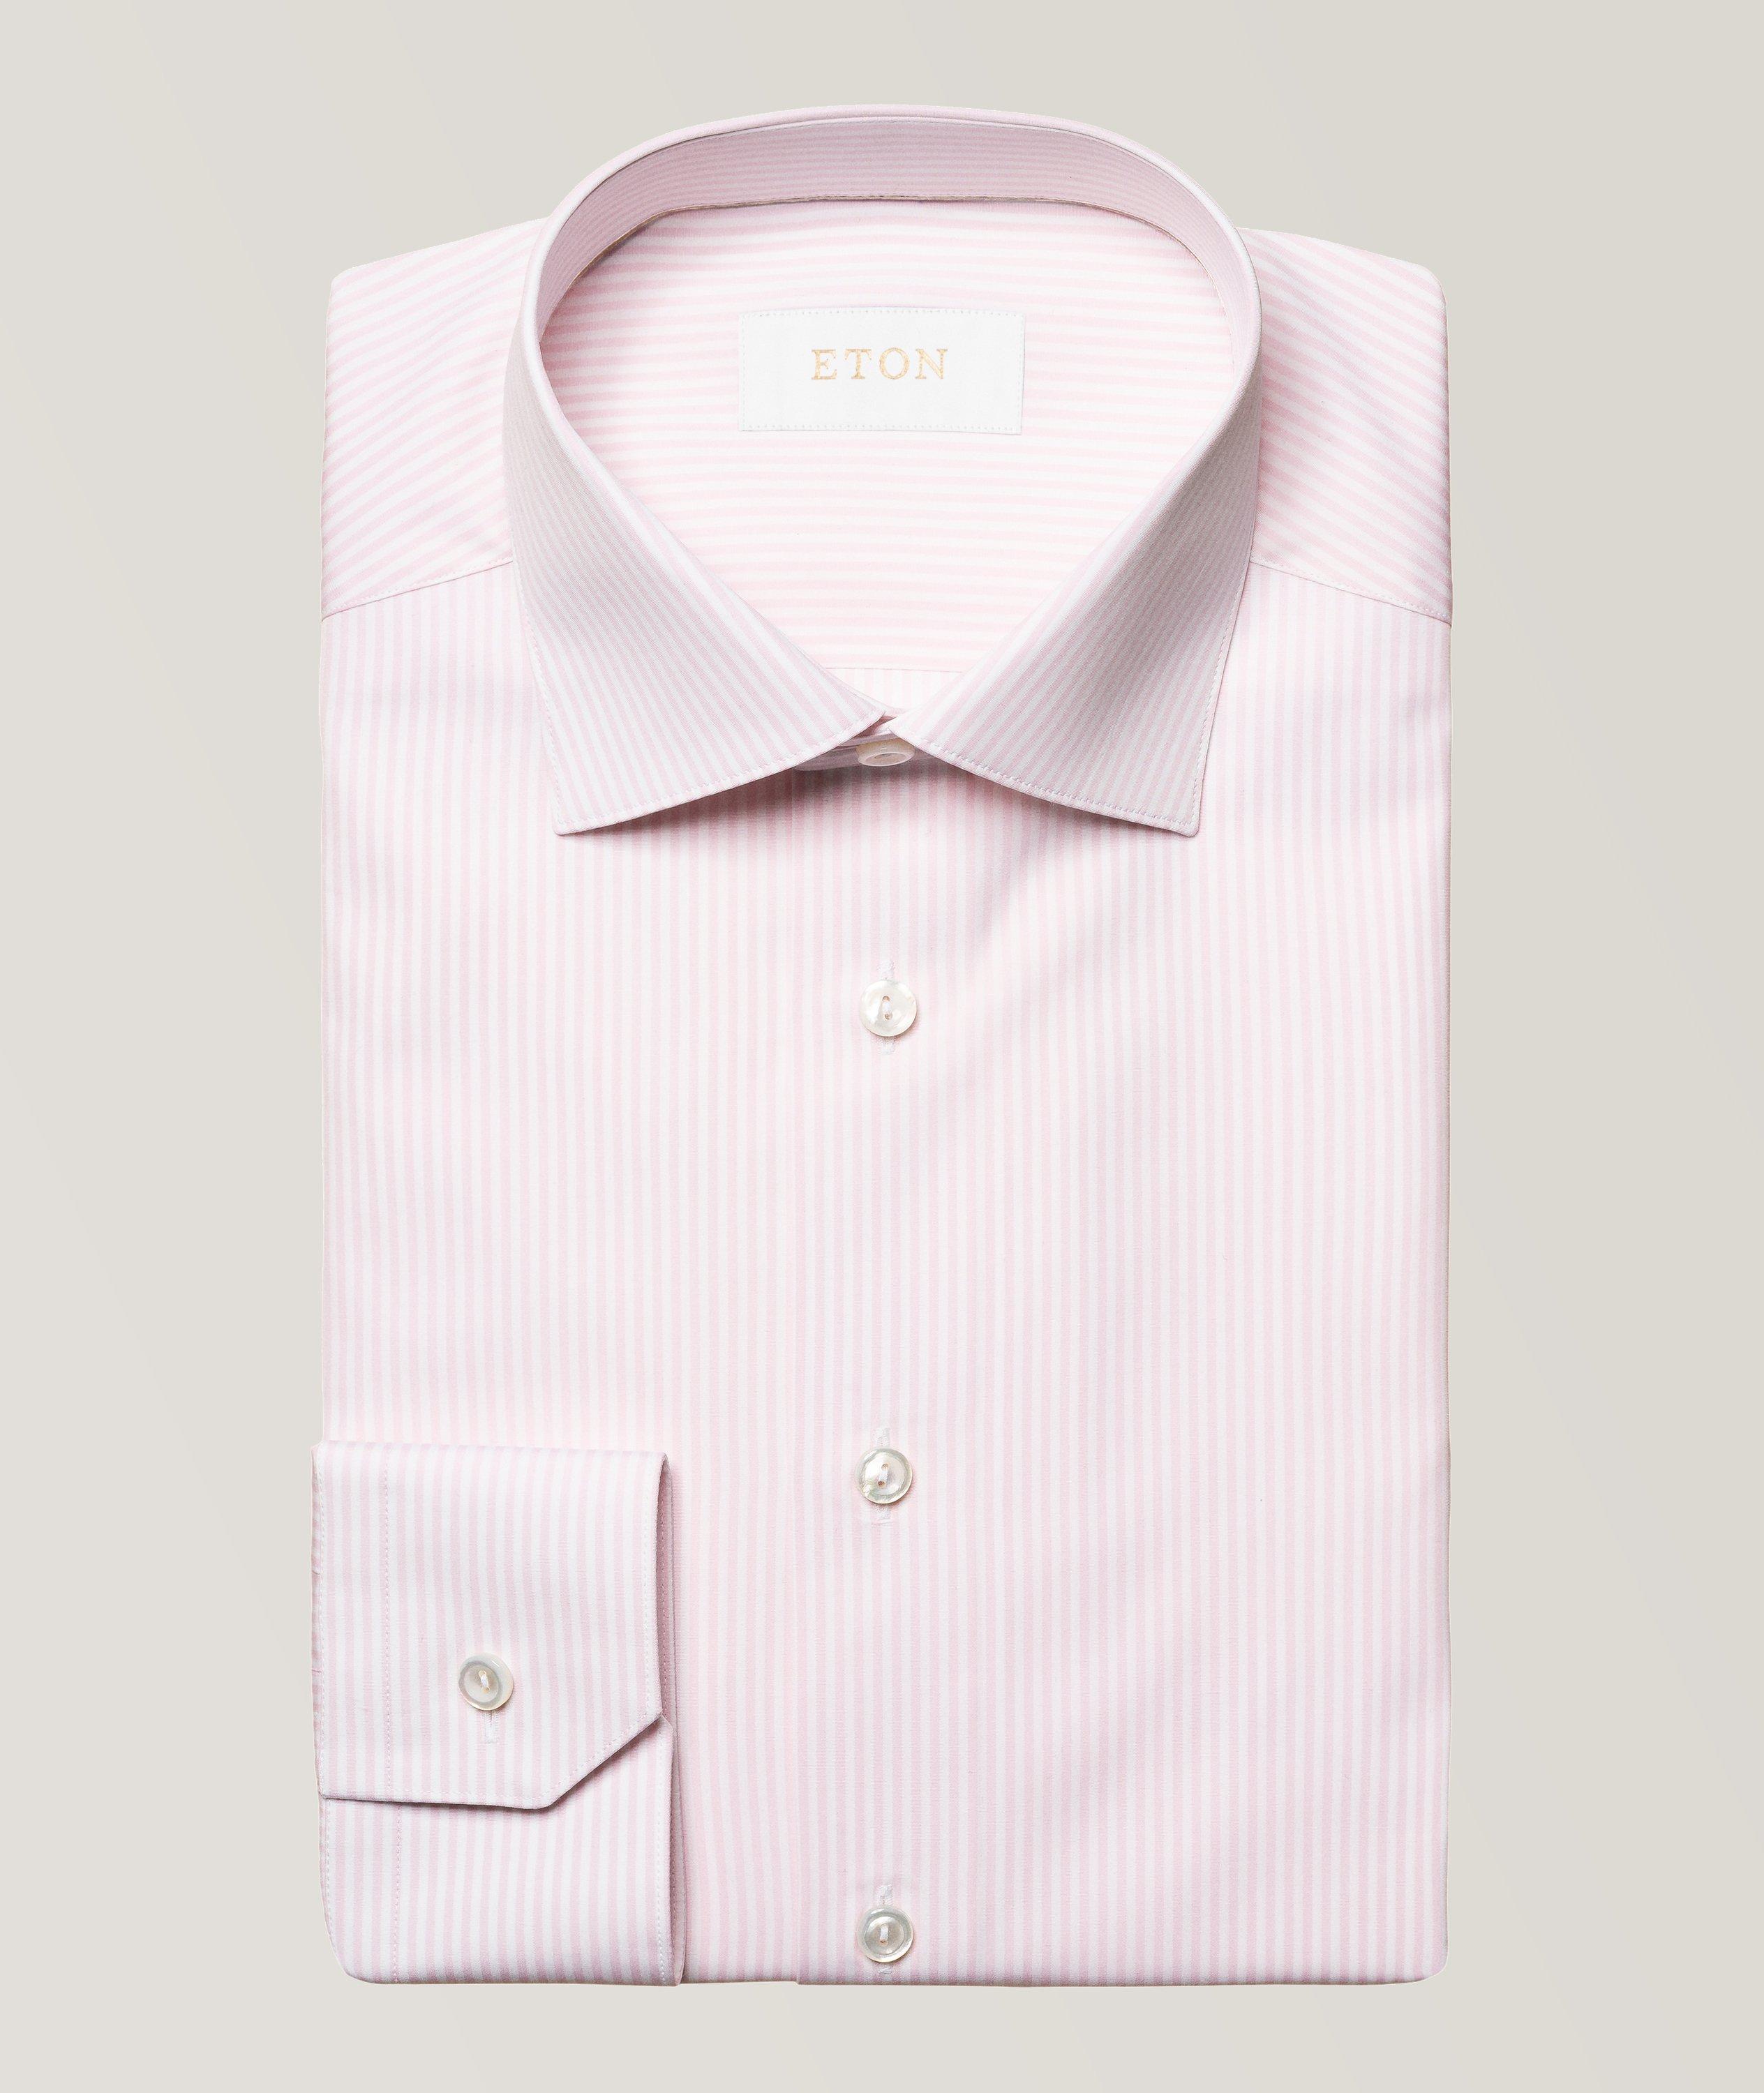 Elevated Collection Bengal Stripe Poplin Dress Shirt image 0